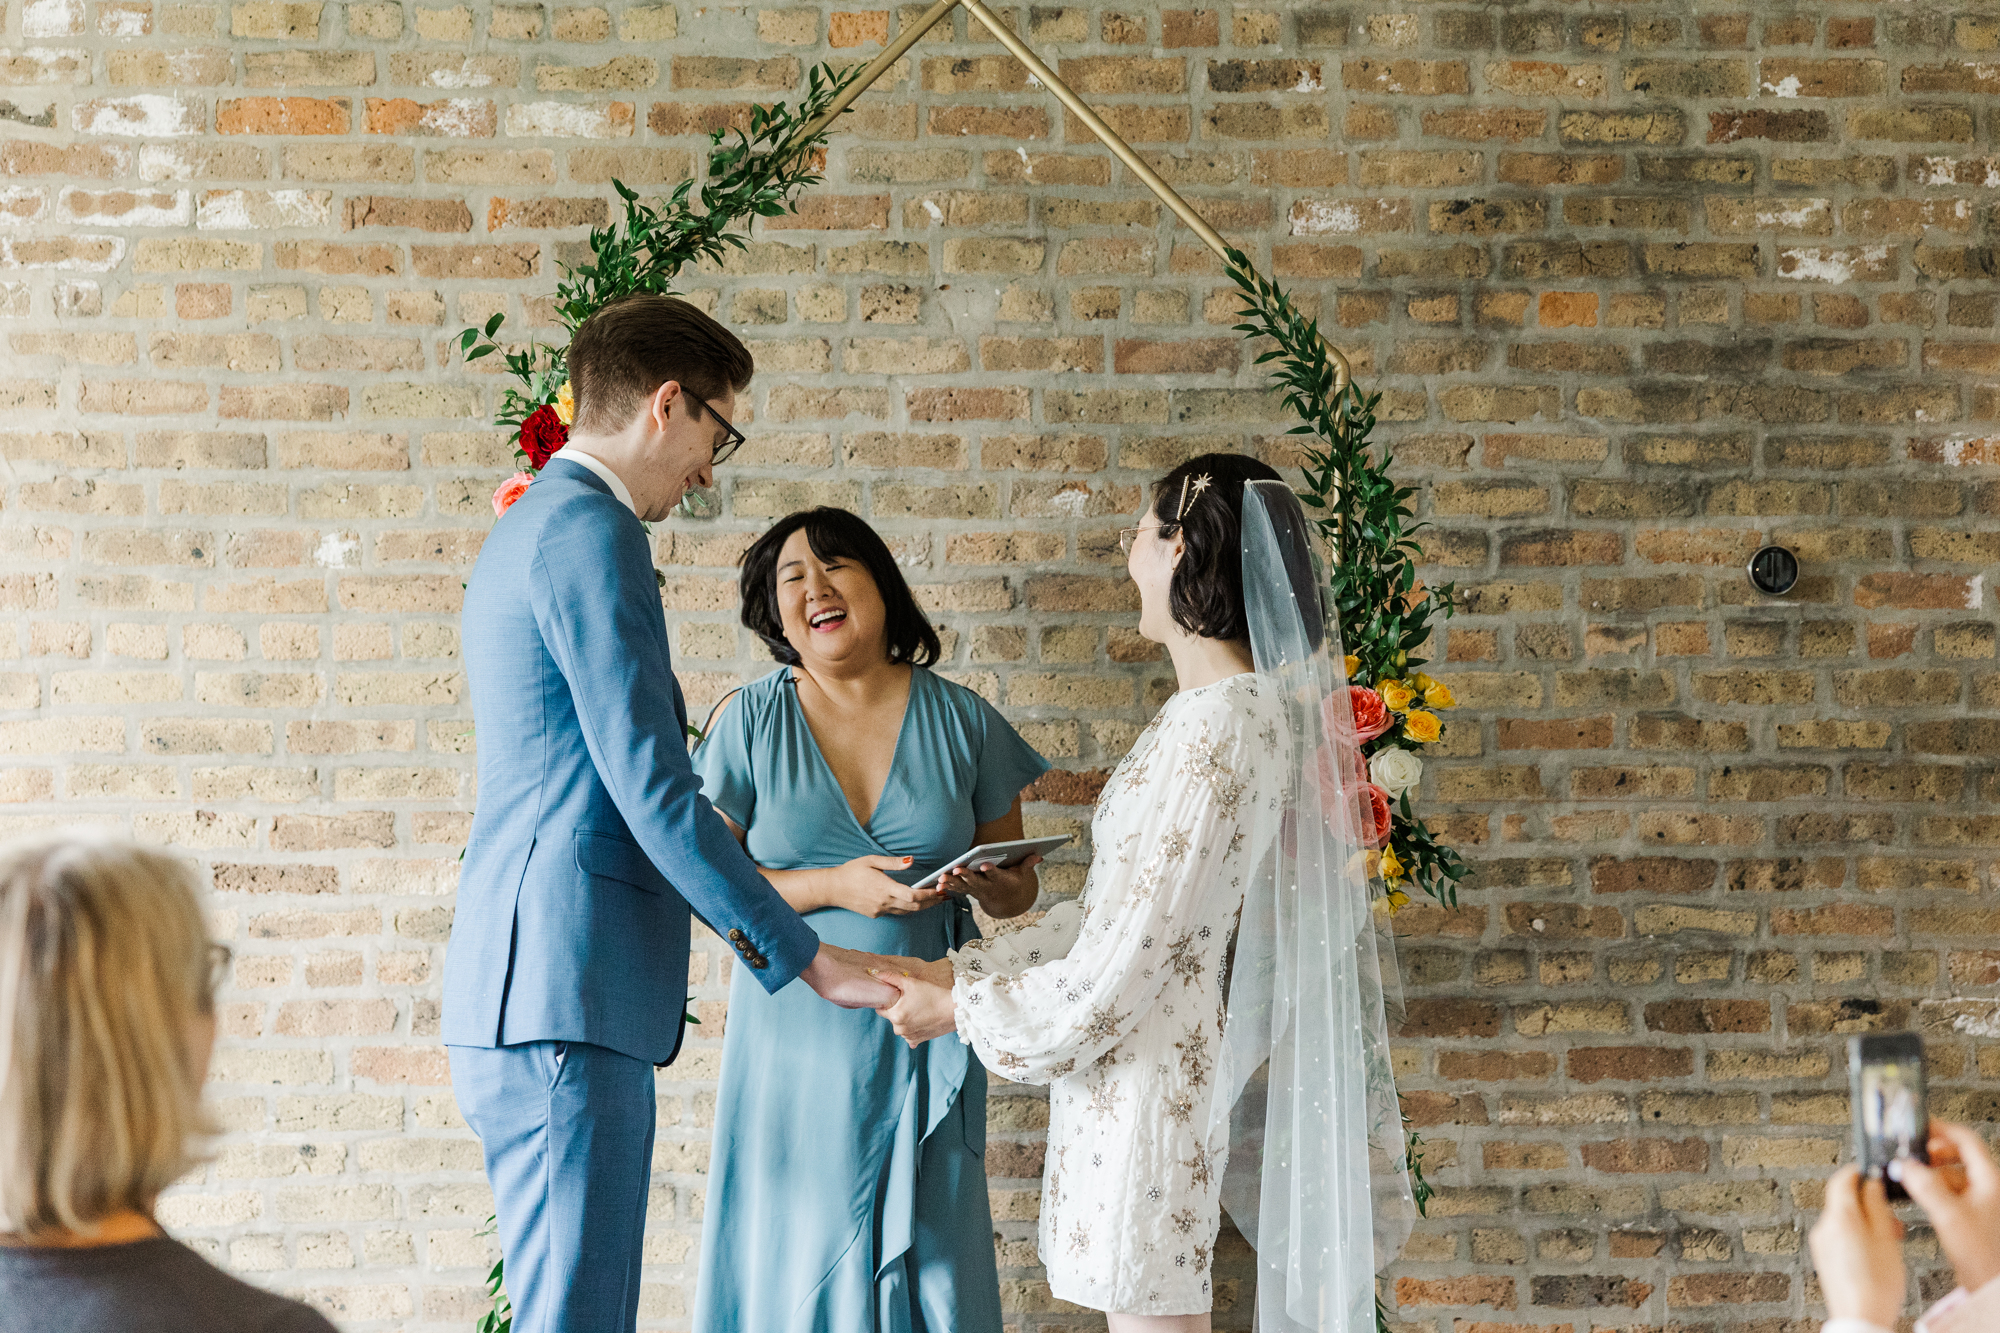 Happy Chicago Micro Wedding Photos at Wicker Park Inn in Fall